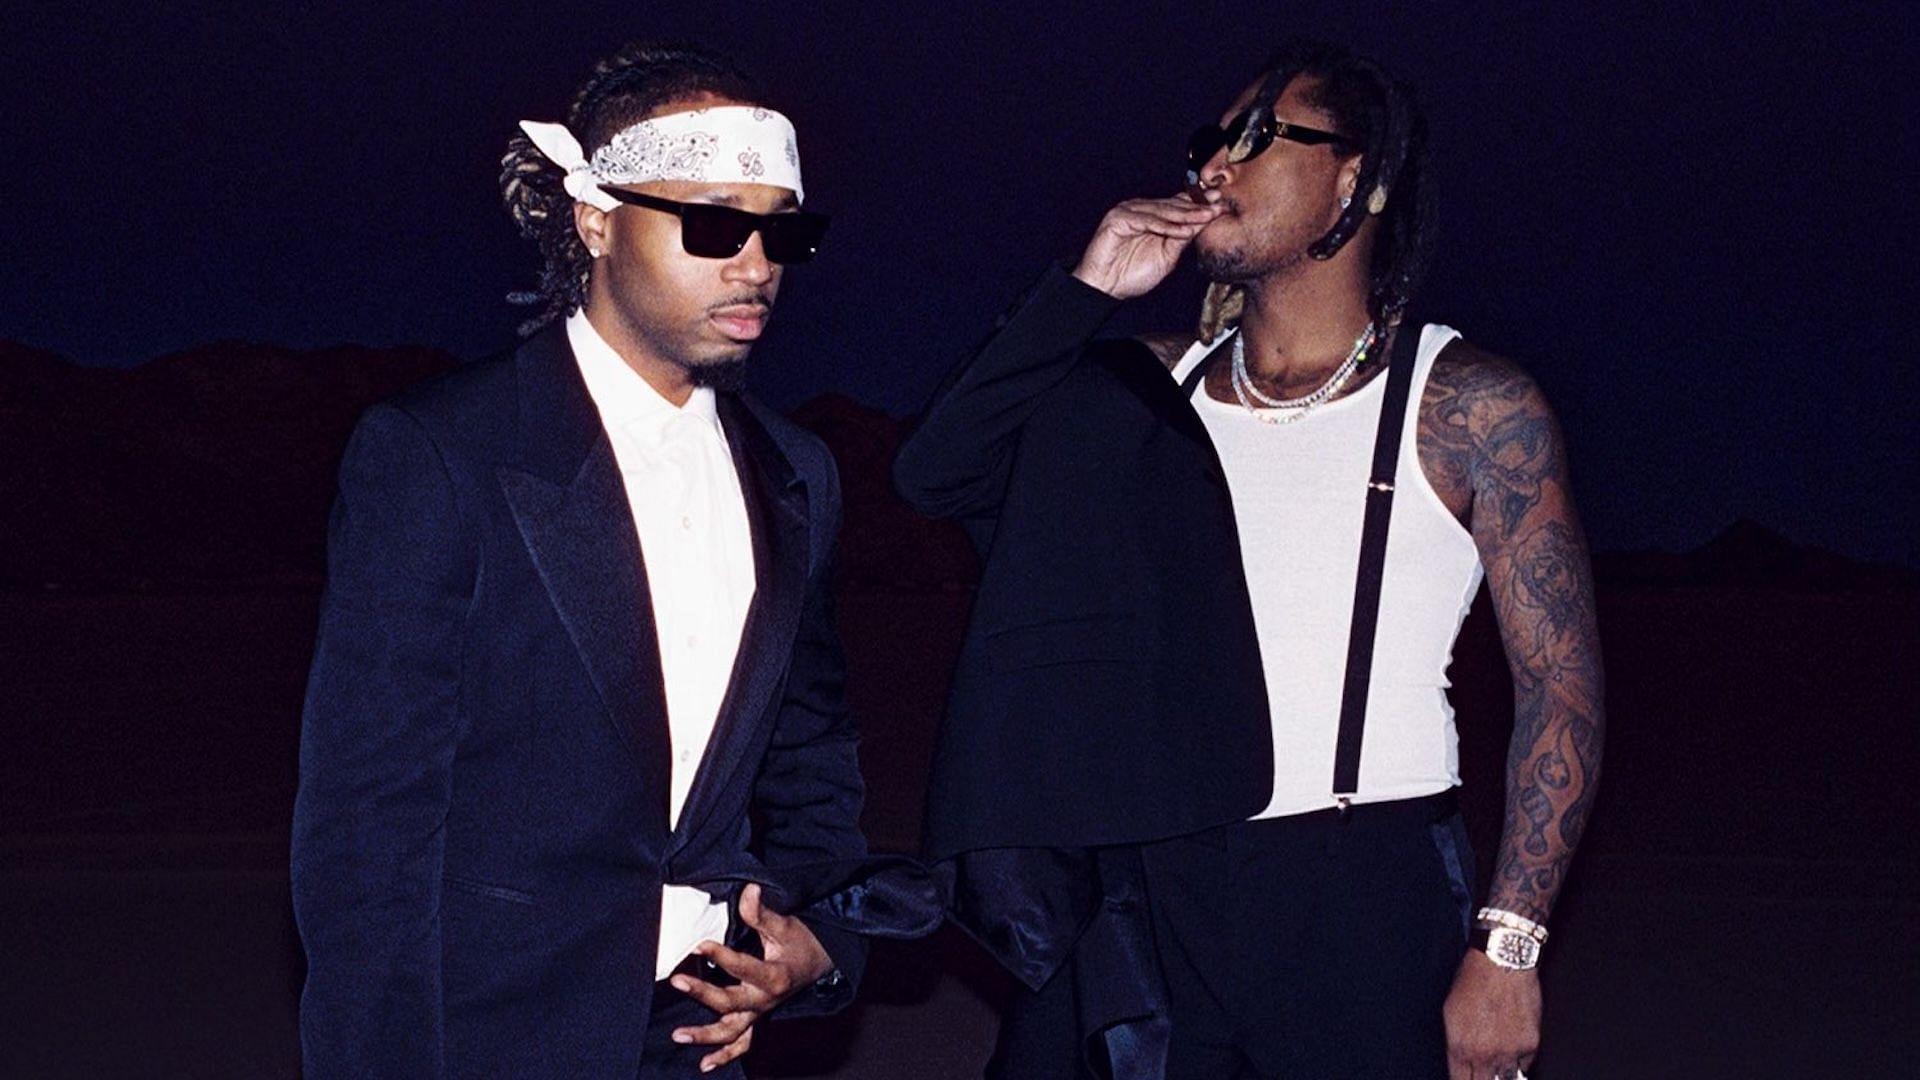 The official album cover for Metro Boomin and Future&#039;s album &#039;We Don&#039;t Trust You&#039; (Image via X/@MetroBoomin)